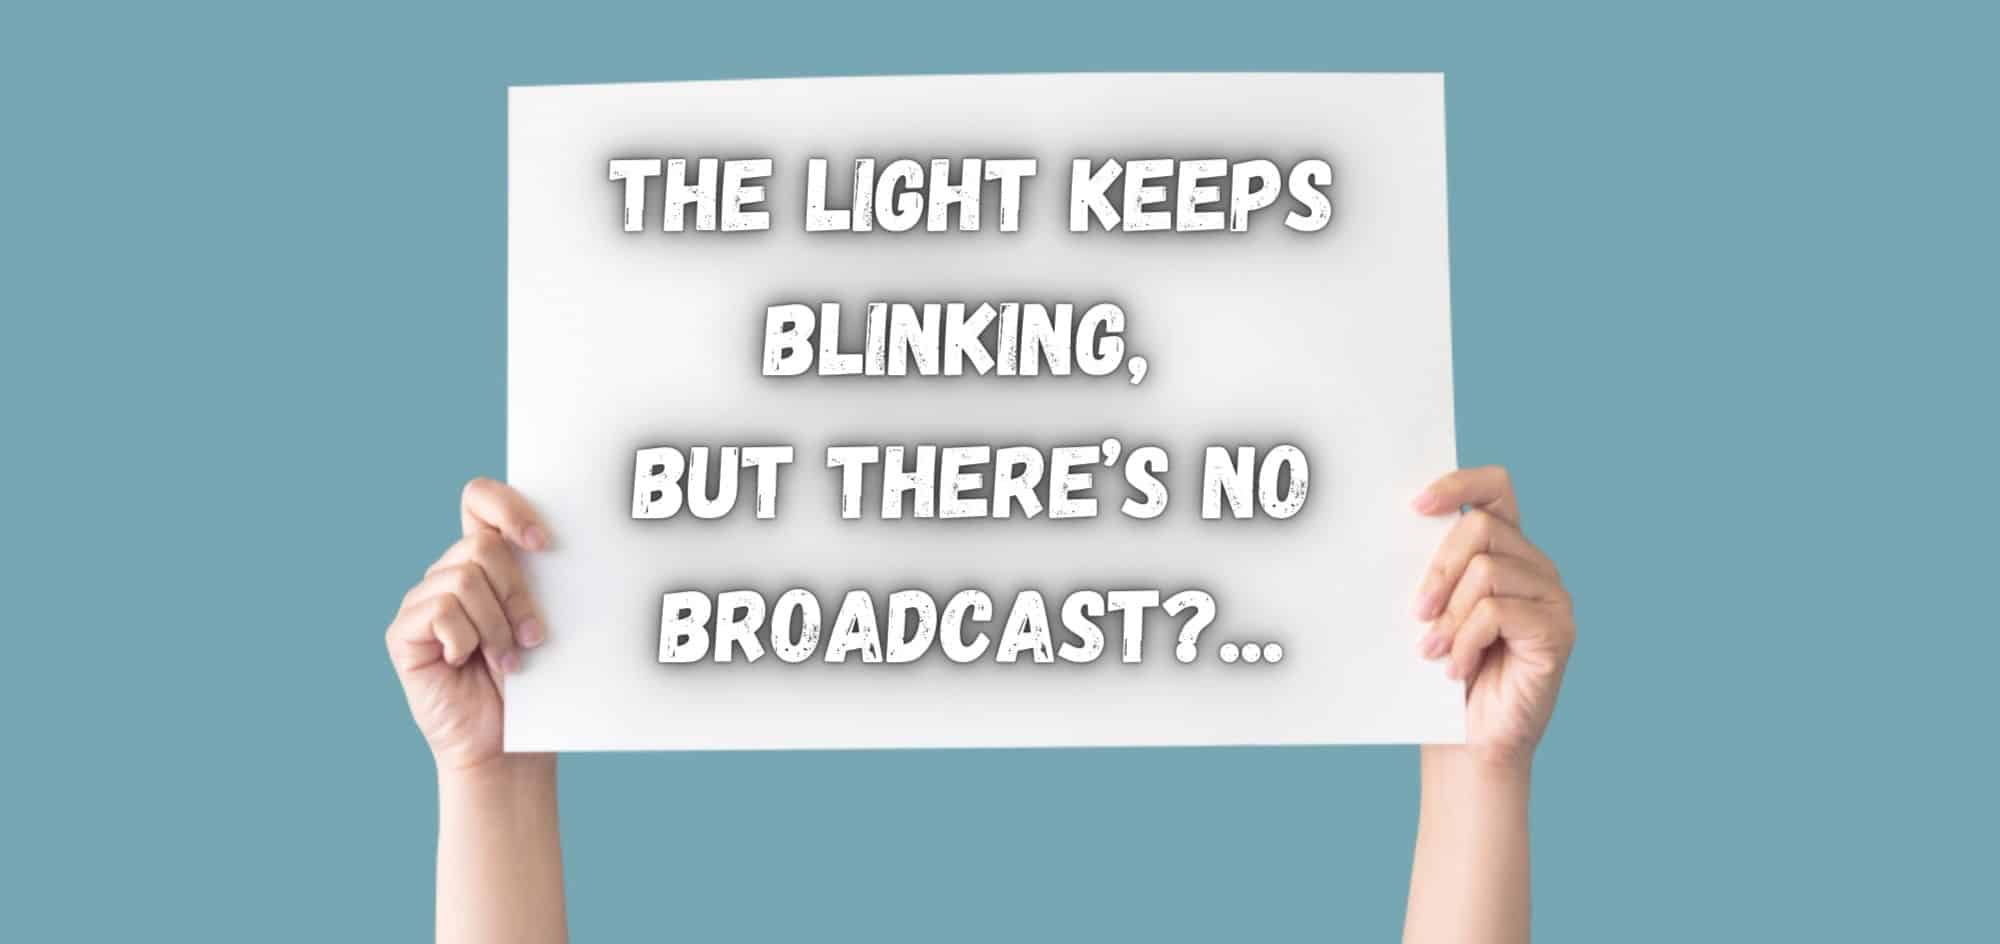 The Light Keeps Blinking, but there’s no Broadcast